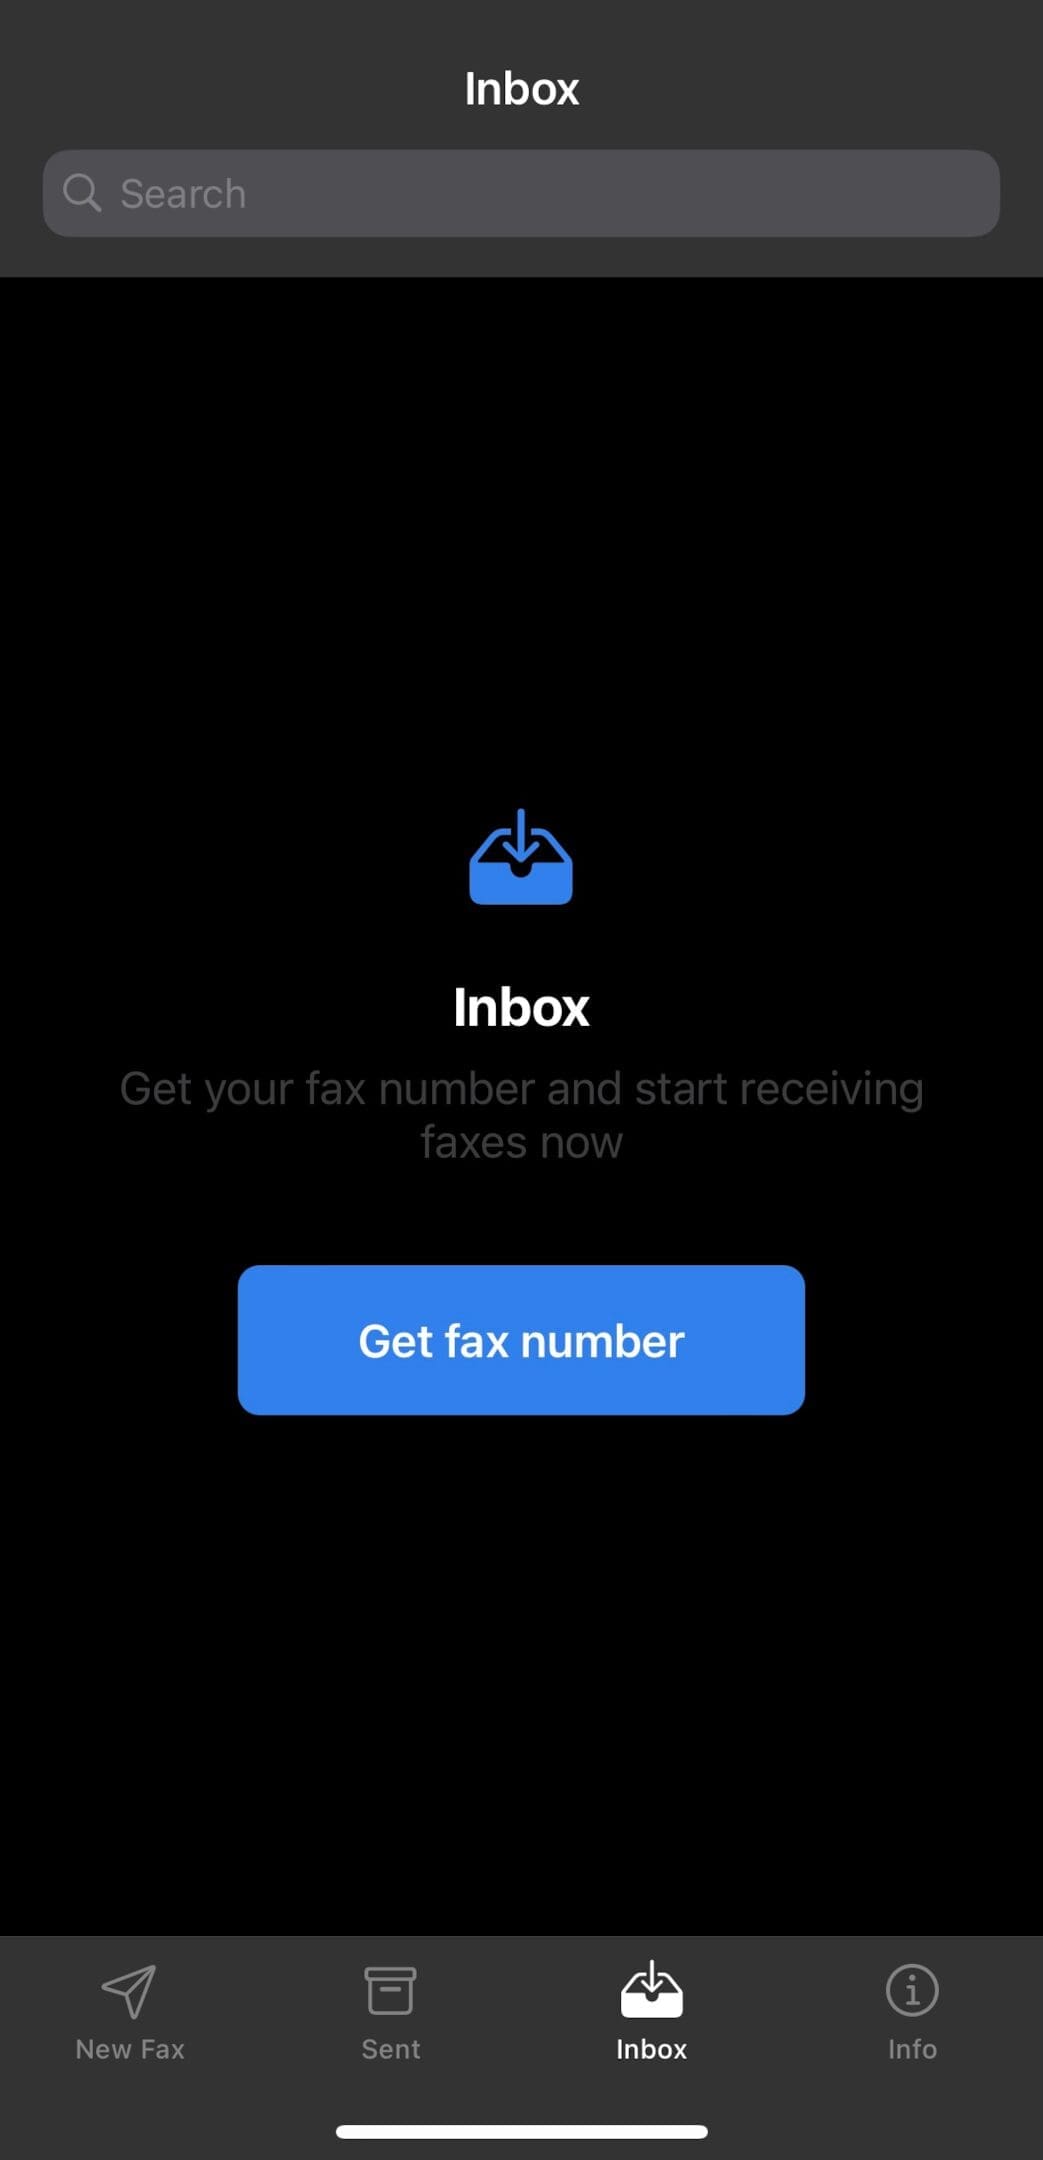 Get fax number interface on the Fax App by Municorn